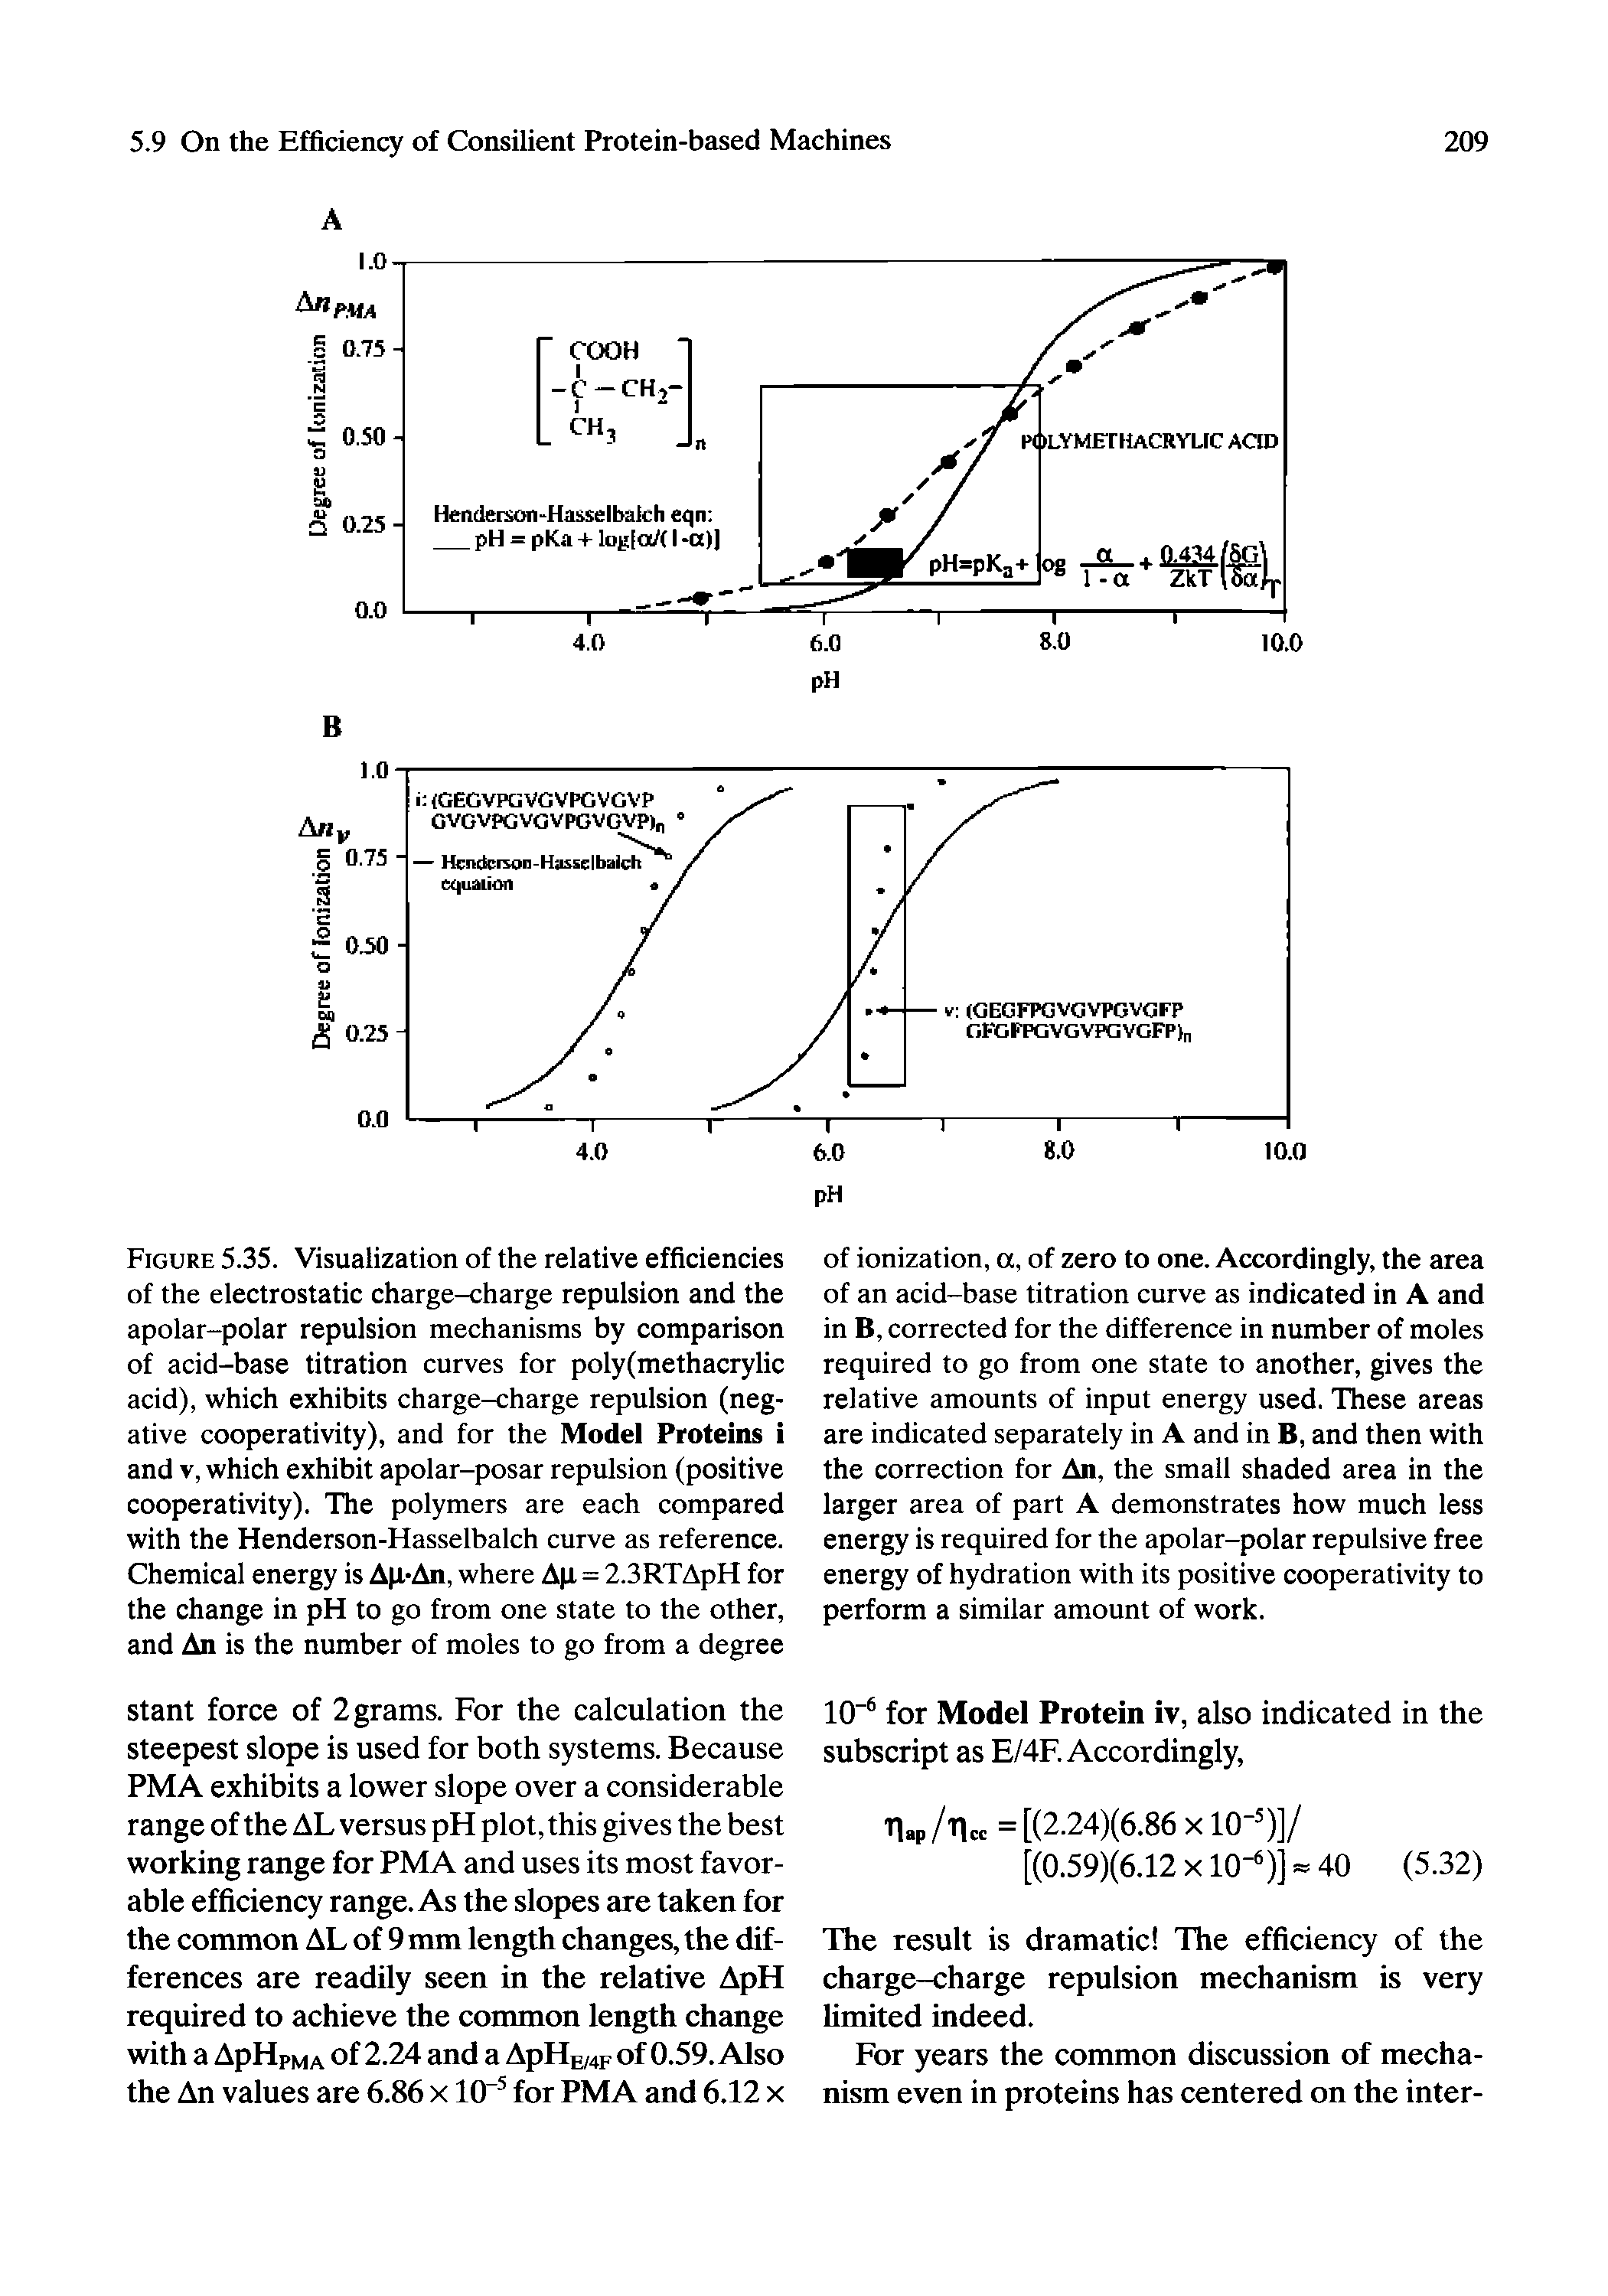 Figure 5.35. Visualization of the relative efficiencies of the electrostatic charge-charge repulsion and the apolar-polar repulsion mechanisms by comparison of acid-base titration curves for poly(methacrylic acid), which exhibits charge-charge repulsion (negative cooperativity), and for the Model Proteins i and V, which exhibit apolar-posar repulsion (positive cooperativity). The polymers are each compared with the Henderson-Hasselbalch curve as reference. Chemical energy is Ap>An, where Ap = 2.3RTApH for the change in pH to go from one state to the other, and An is the number of moles to go from a degree...